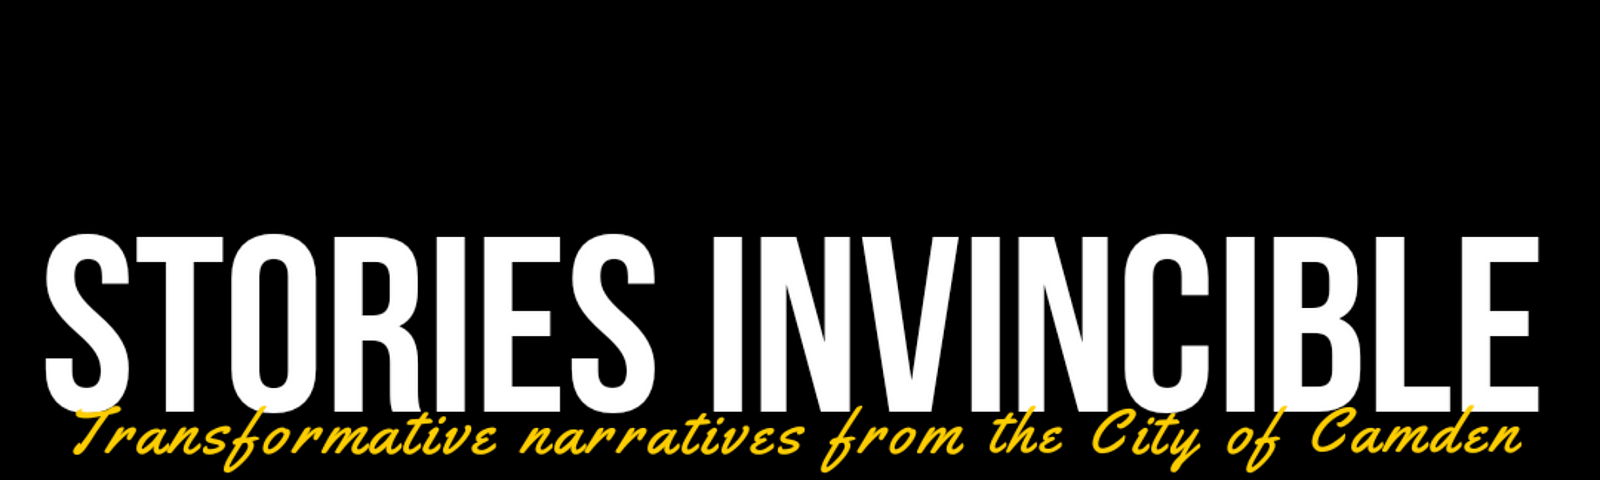 Decoration only: White text reads “STORIES INVINCIBLE” against a black background with a yellow subheading that reads “Transformative narratives from the City of Camden.”